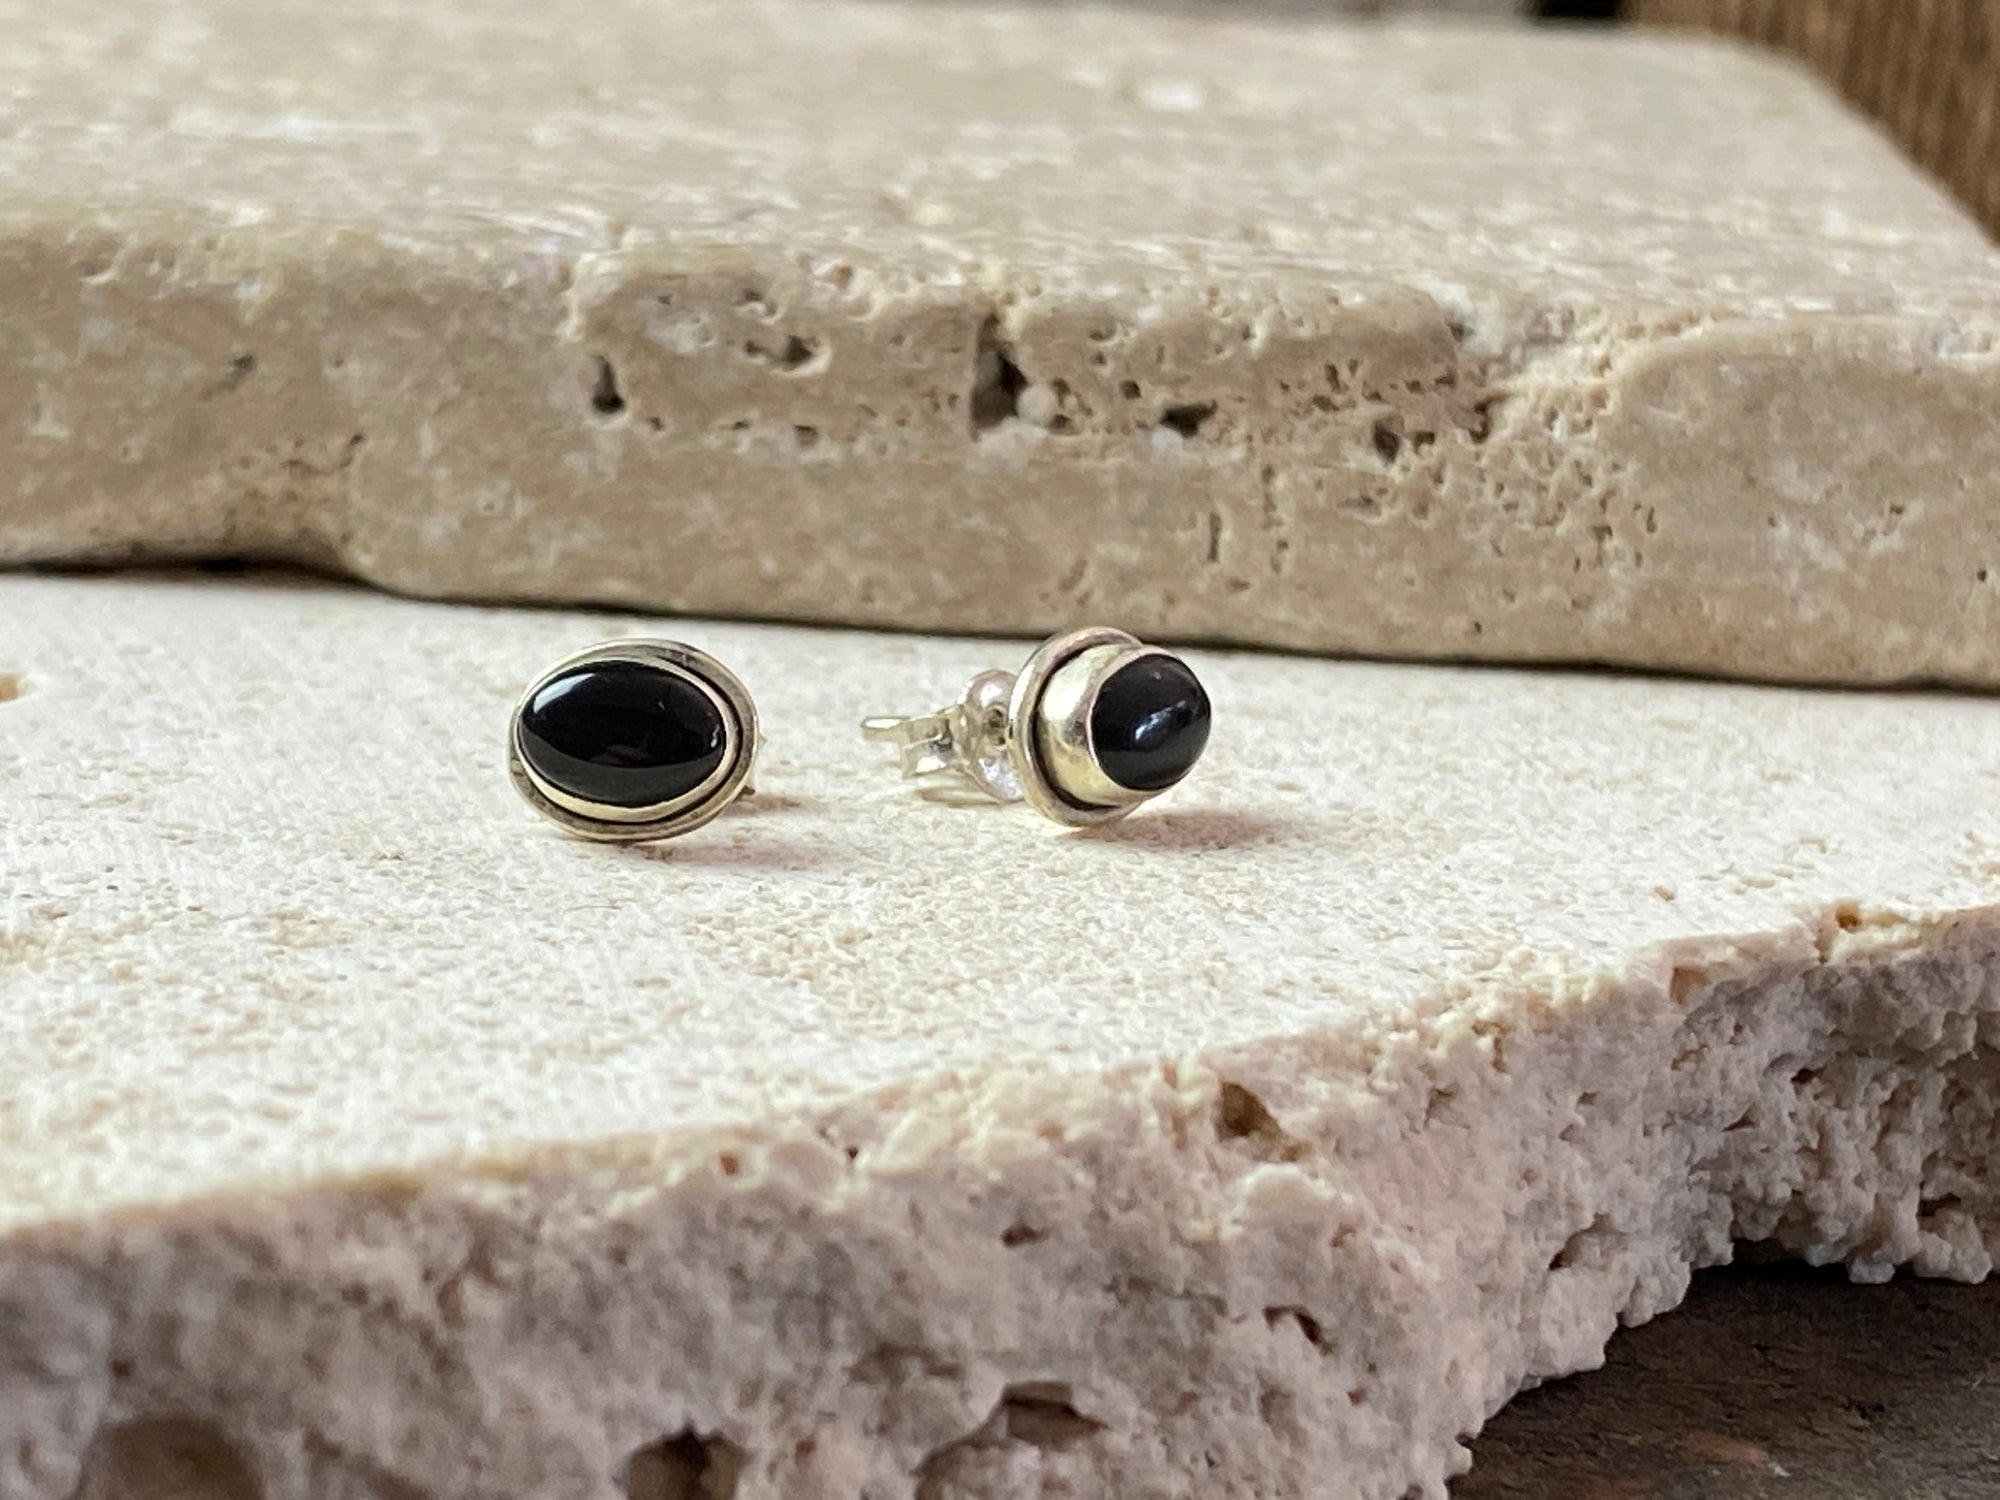 Simple black onyx and sterling silver ear studs with a simple raised bezel setting